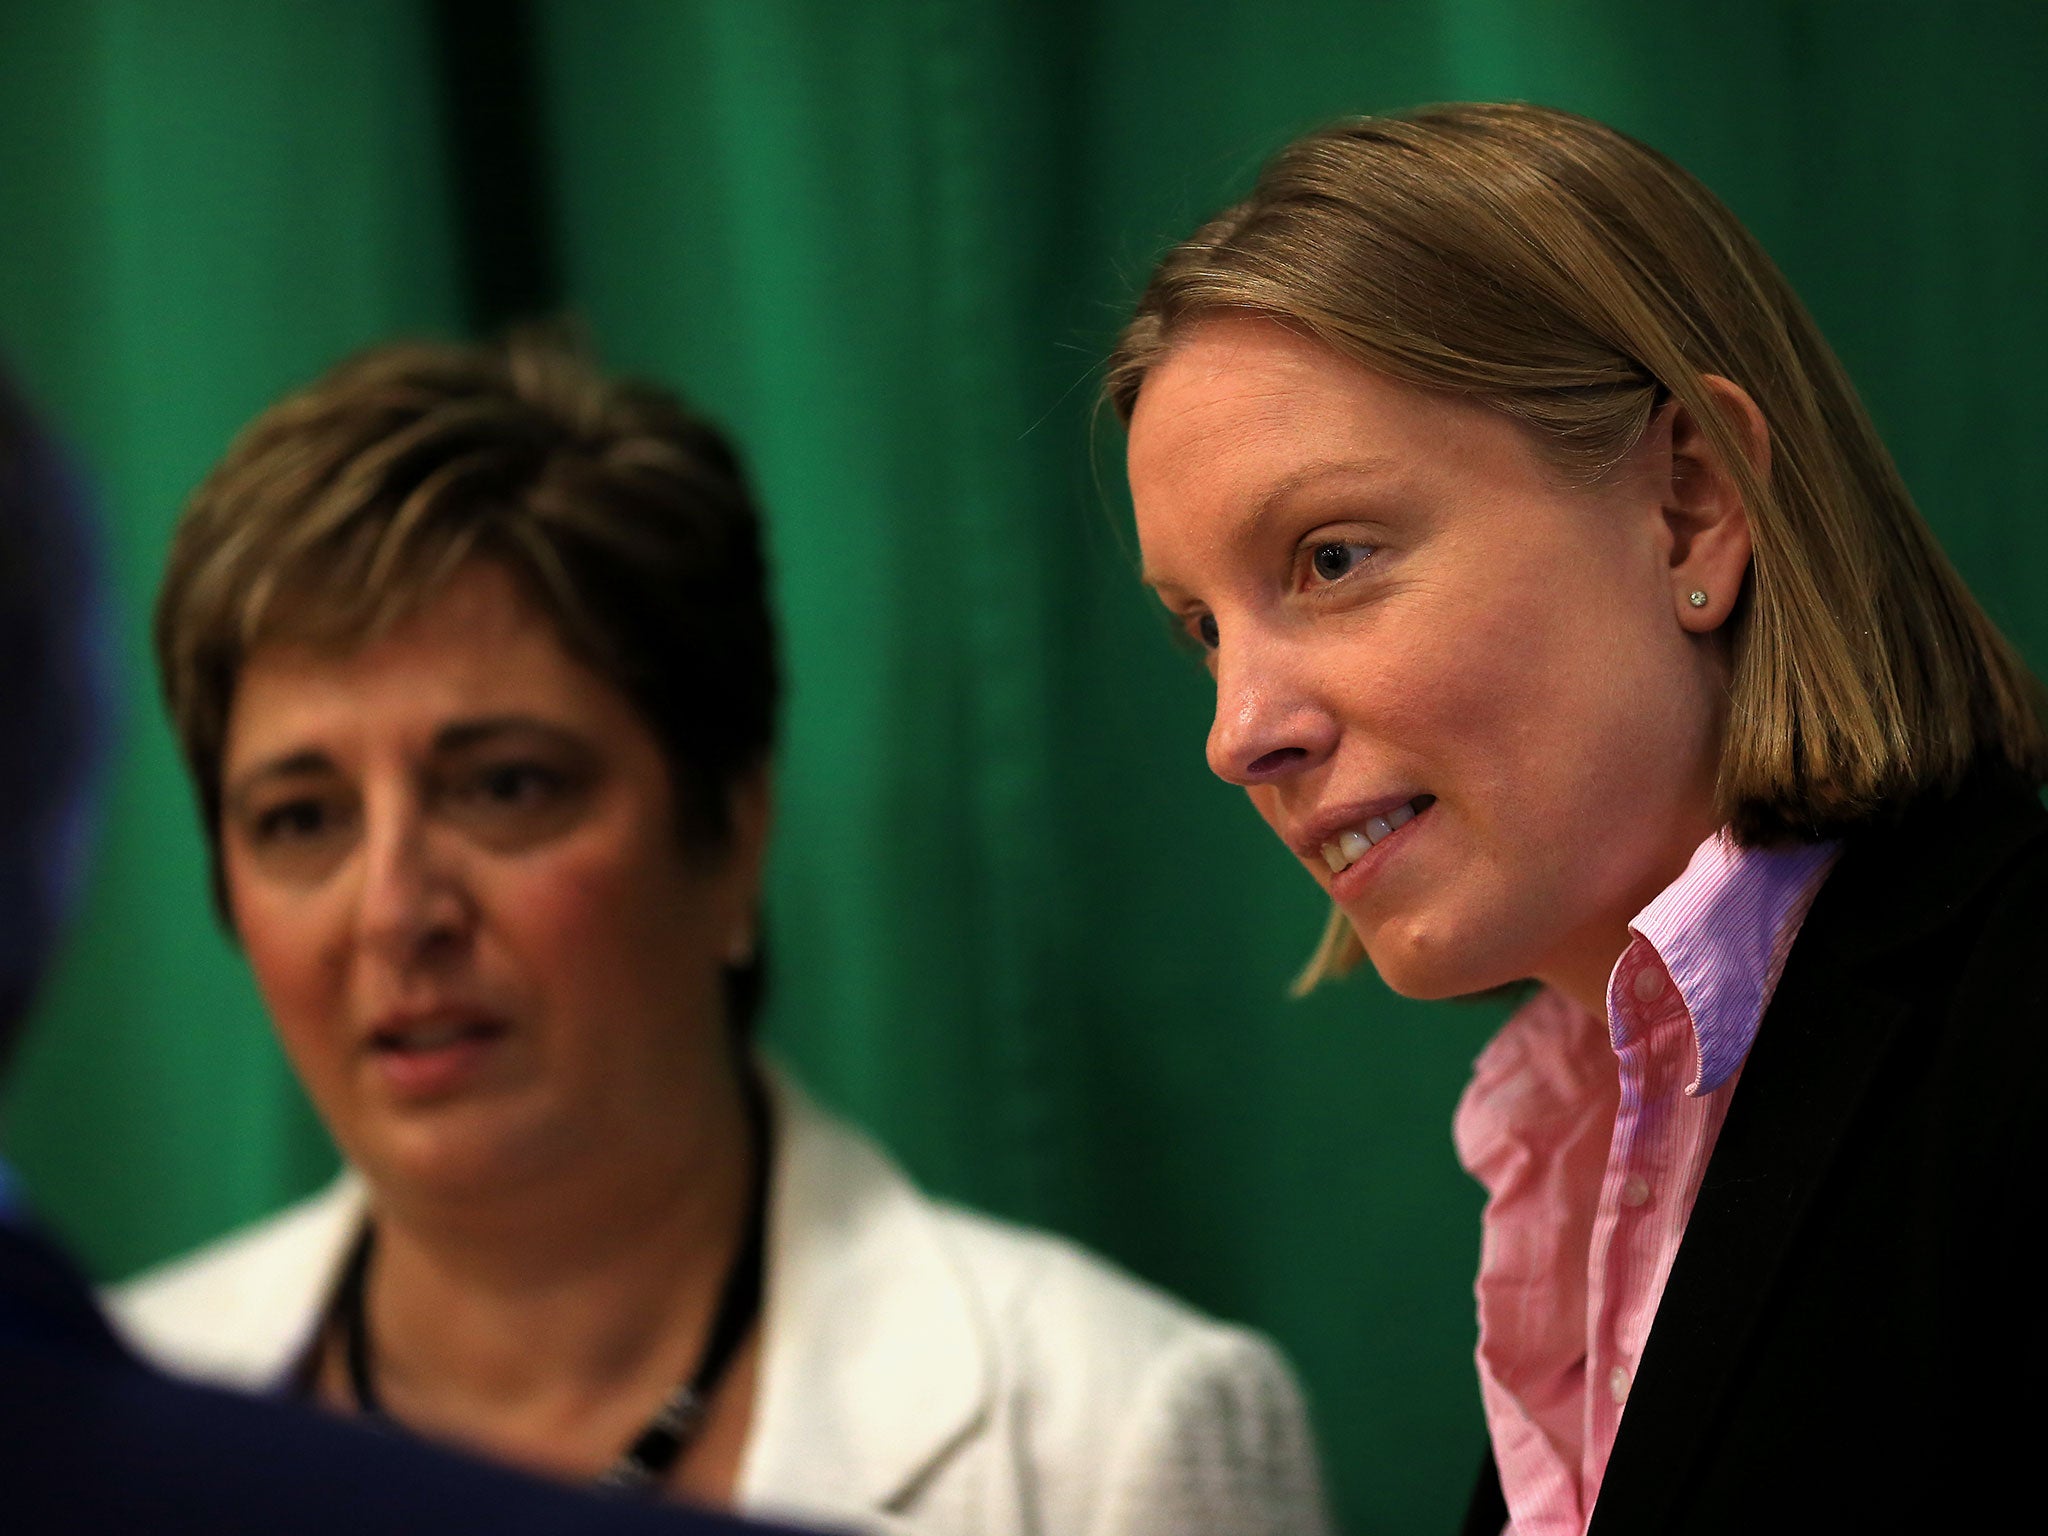 Tracey Crouch confirmed the news to the House of Commons on Thursday